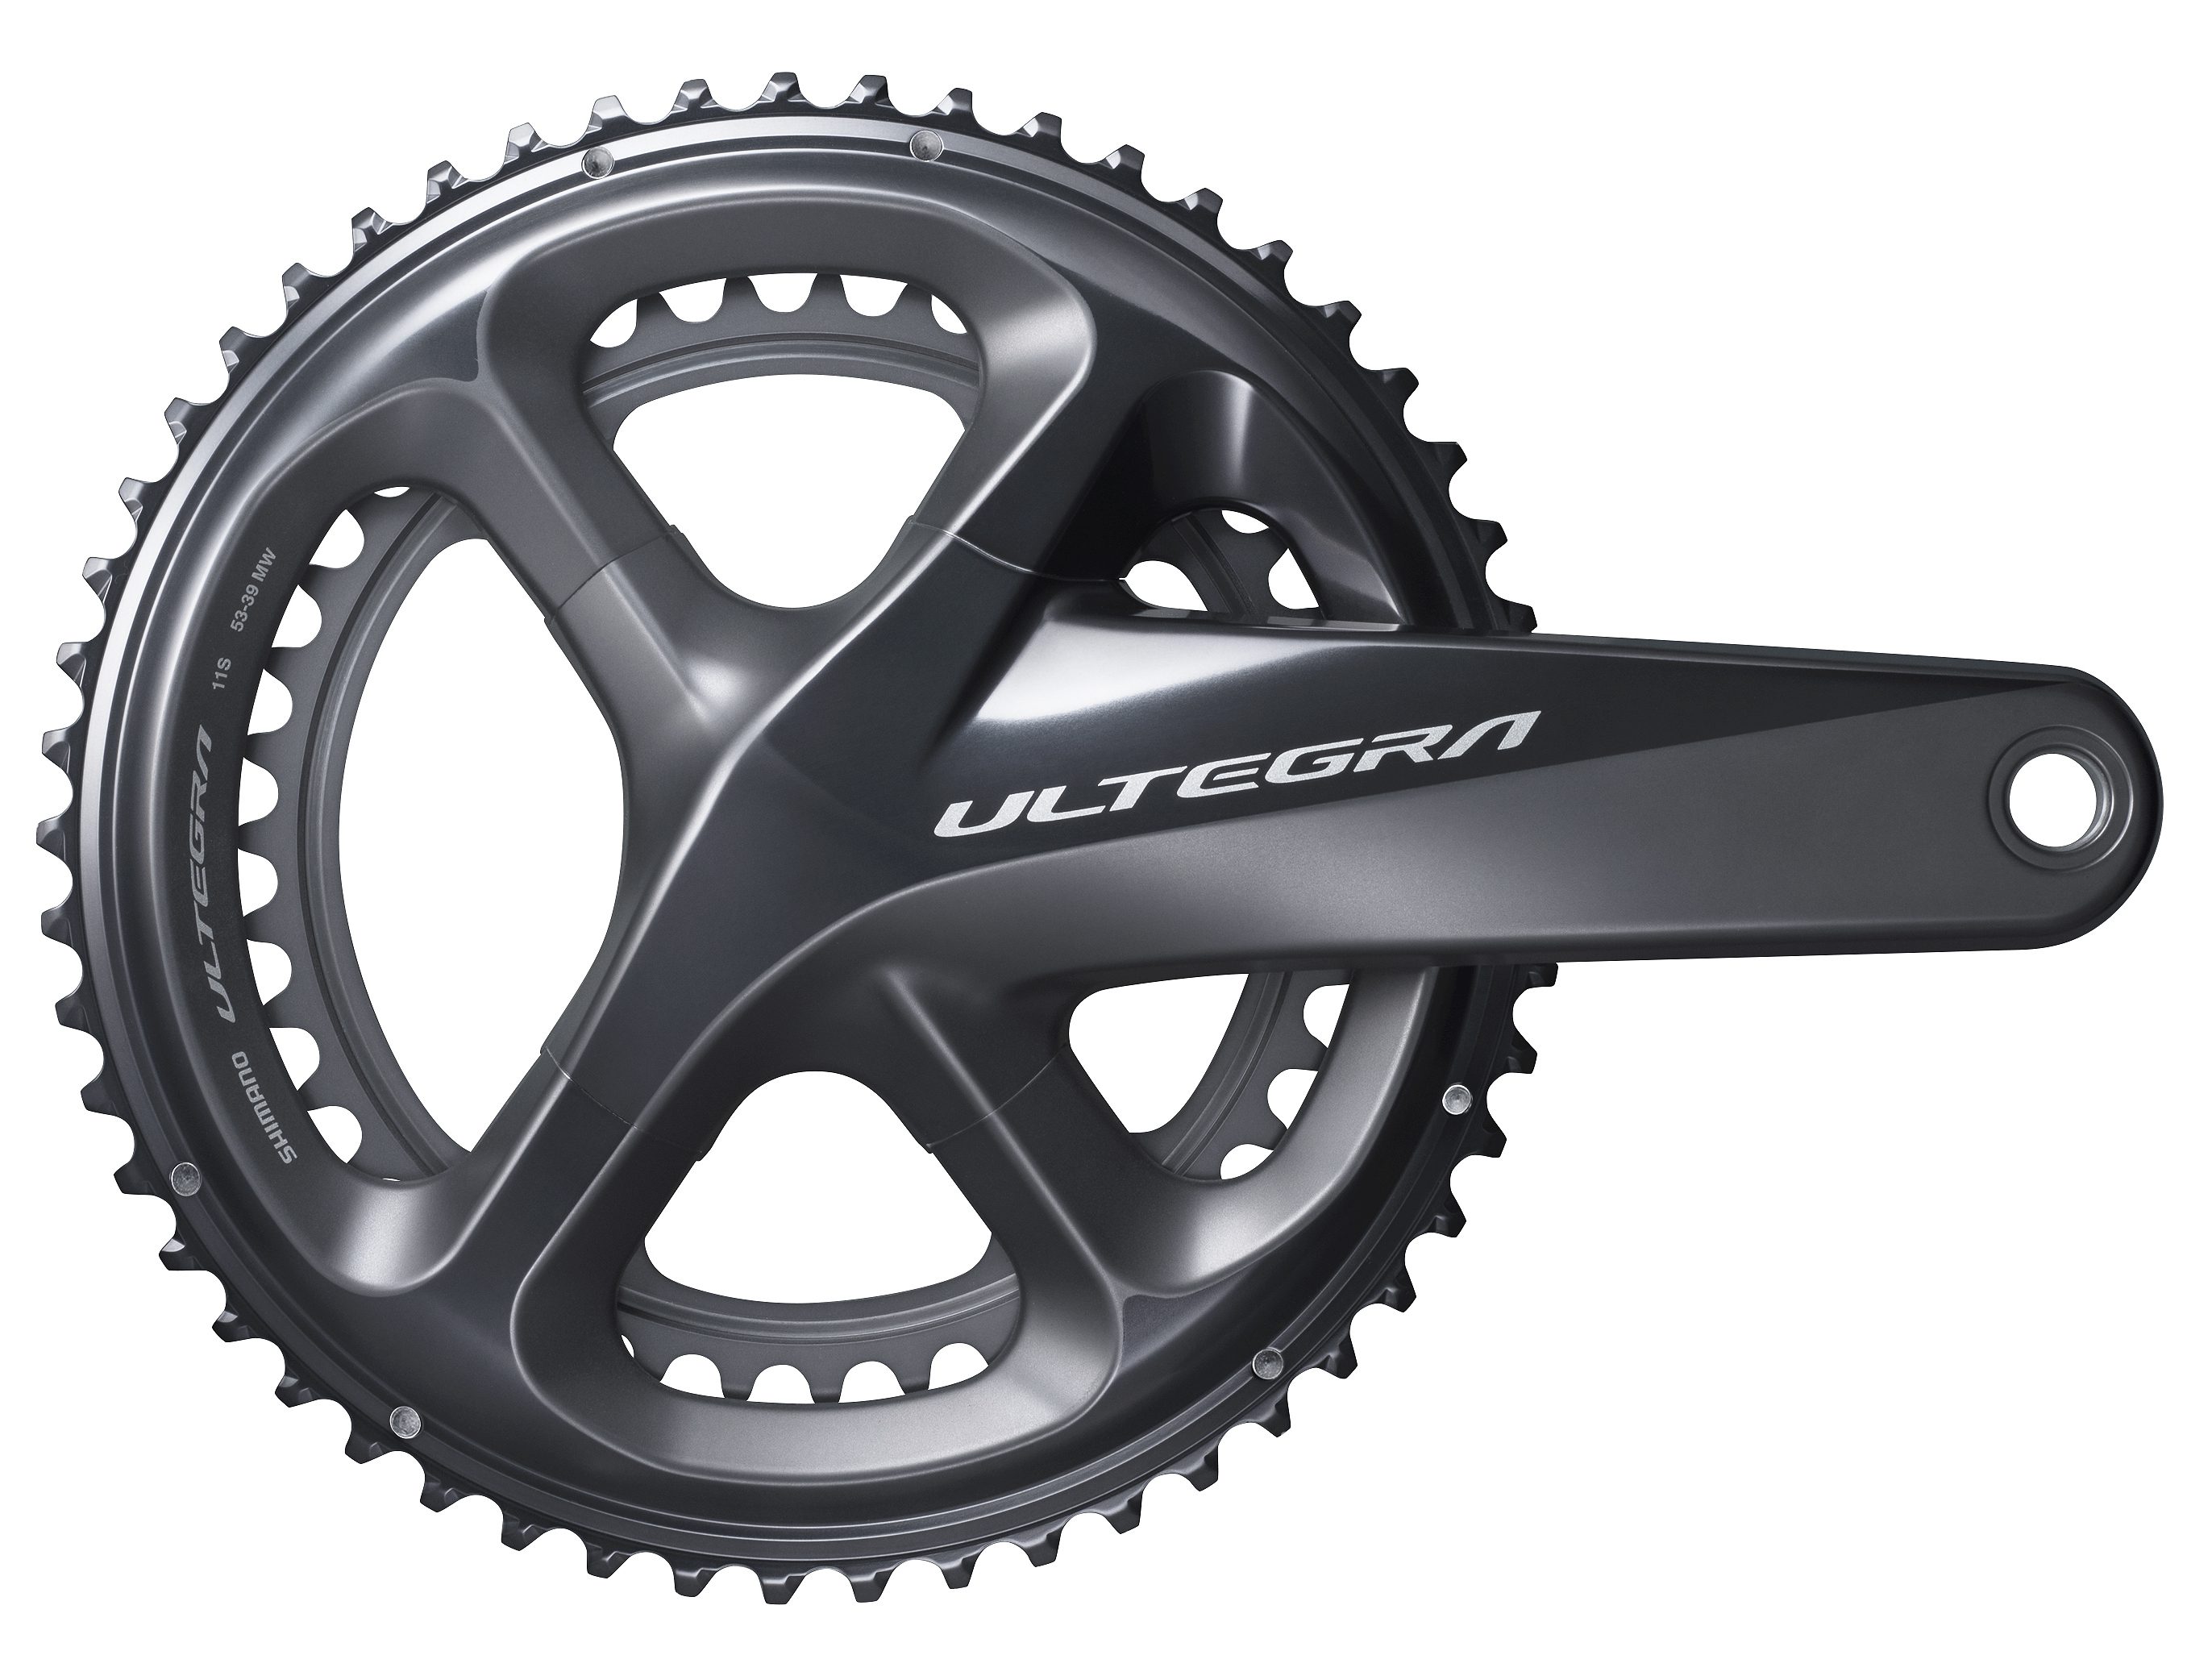 New Shimano Ultegra R8000 mechanical and Di2 groupsets unveiled